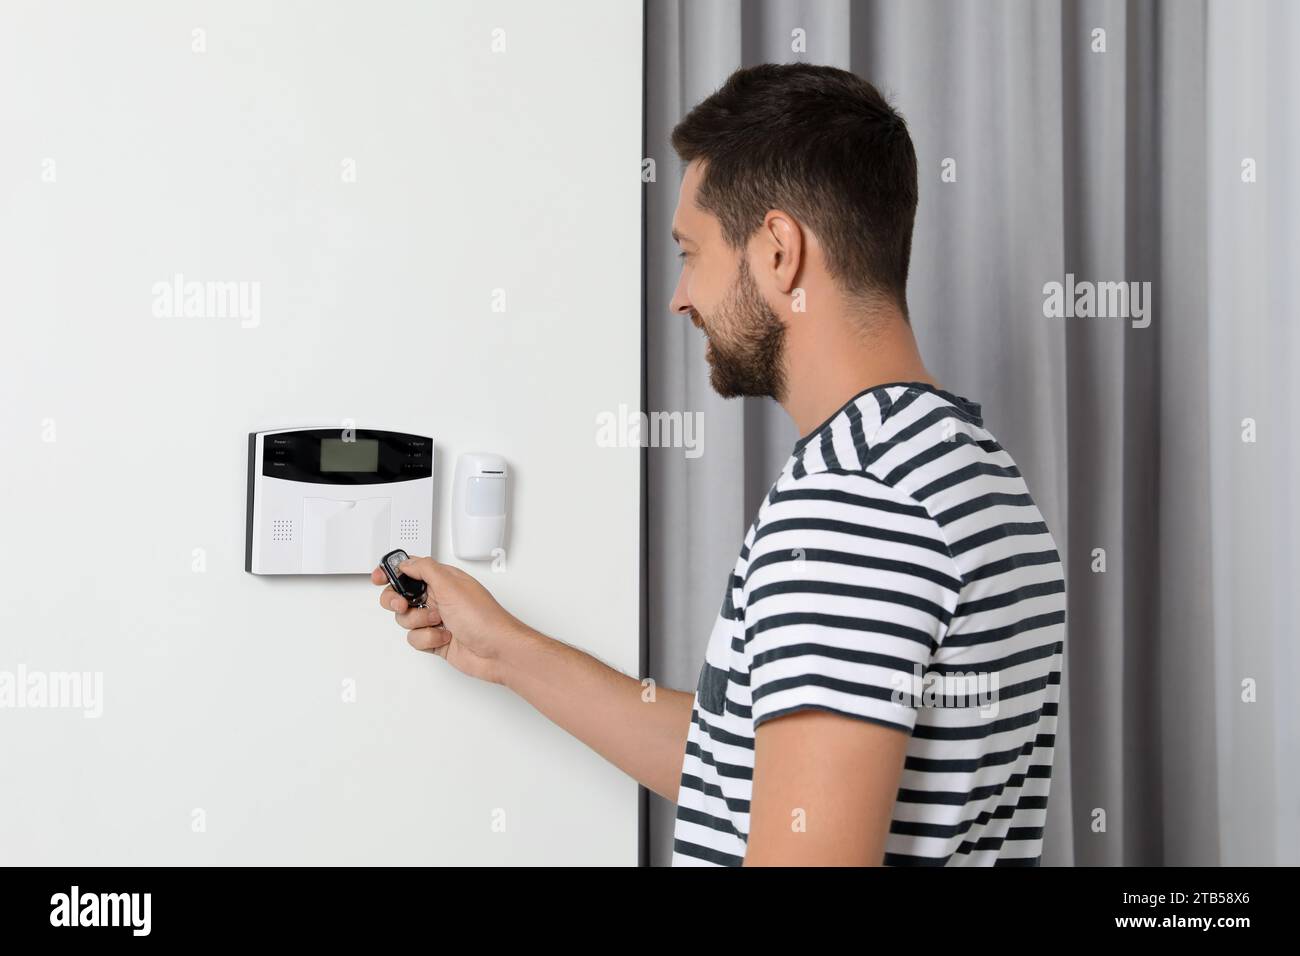 Home security system. Man using alarm key fob indoors Stock Photo